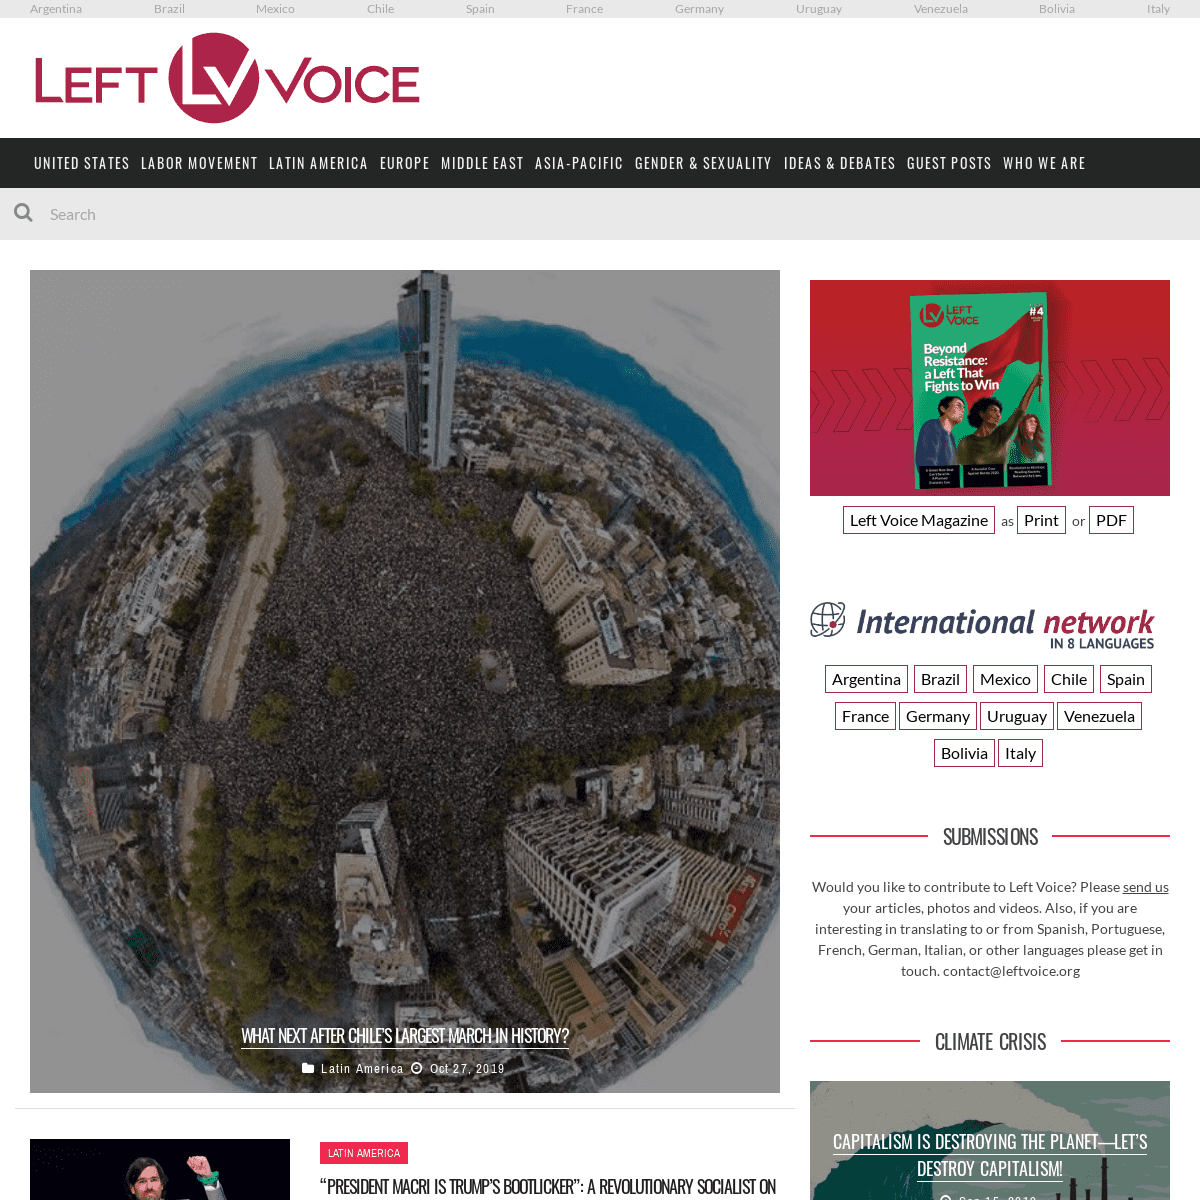 A complete backup of leftvoice.org